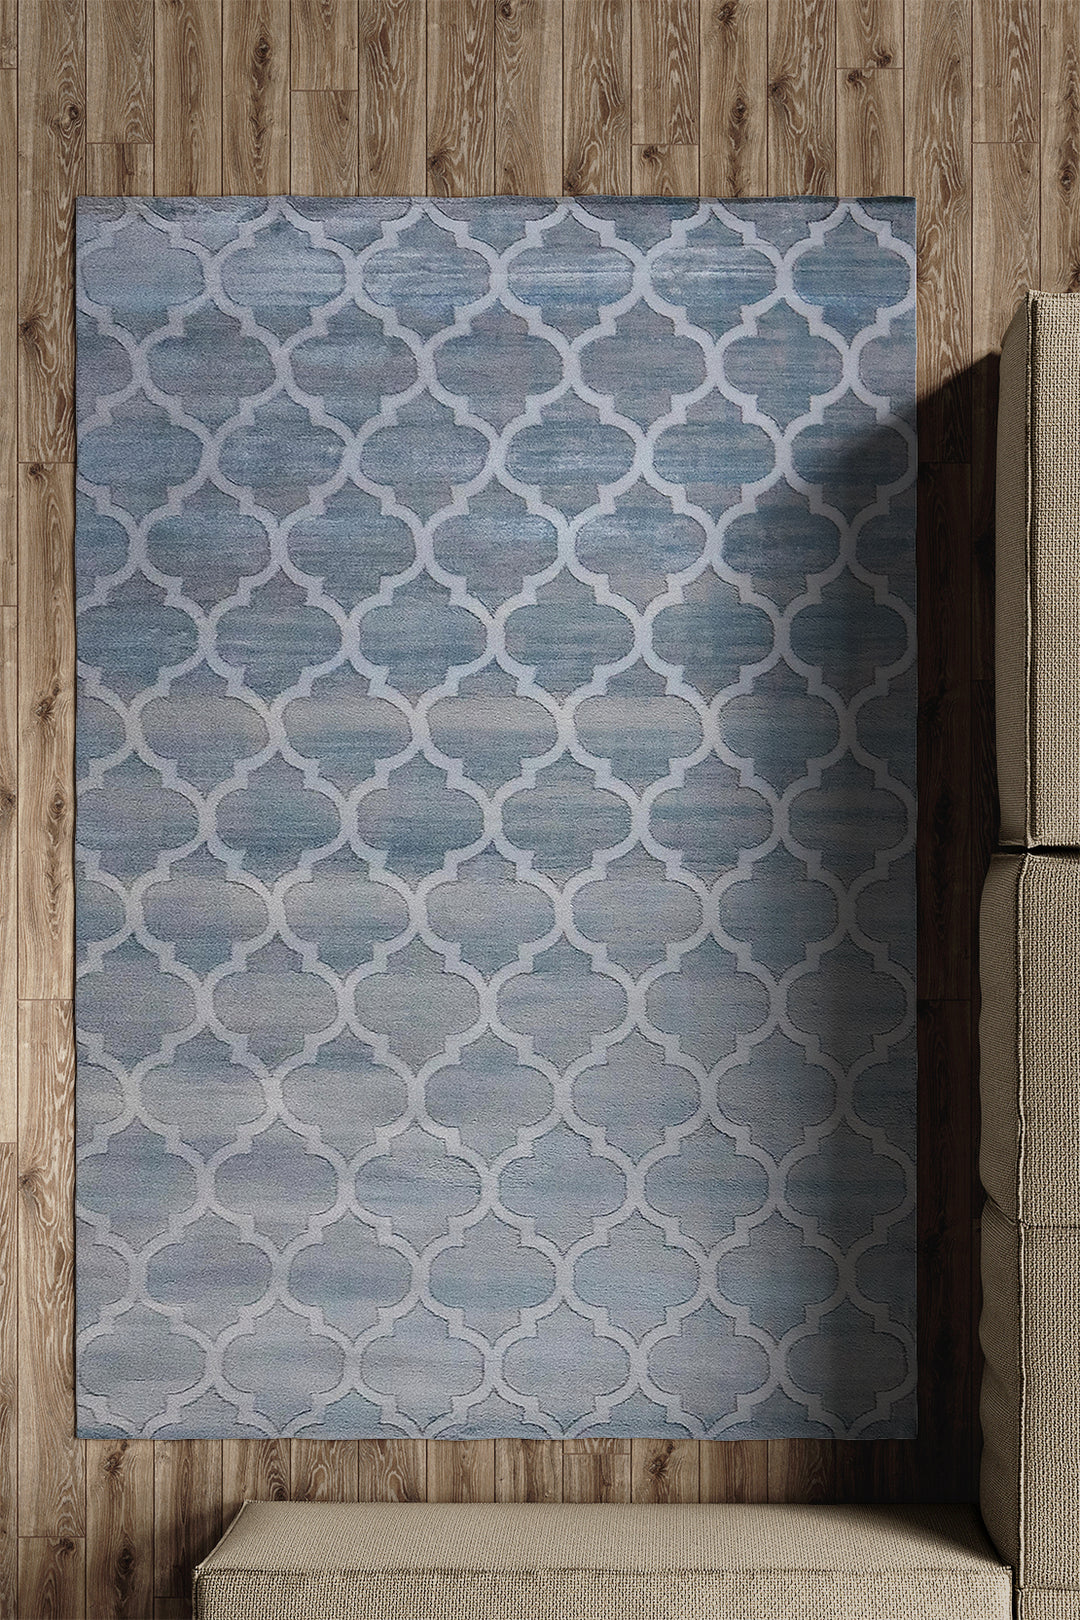 Turkish Modern Rug - 4.9 x 7.5 FT - Rug Festival 1, Blue and Cream - Superior Comfort, Modern & Contemporary Style Accent Rugs